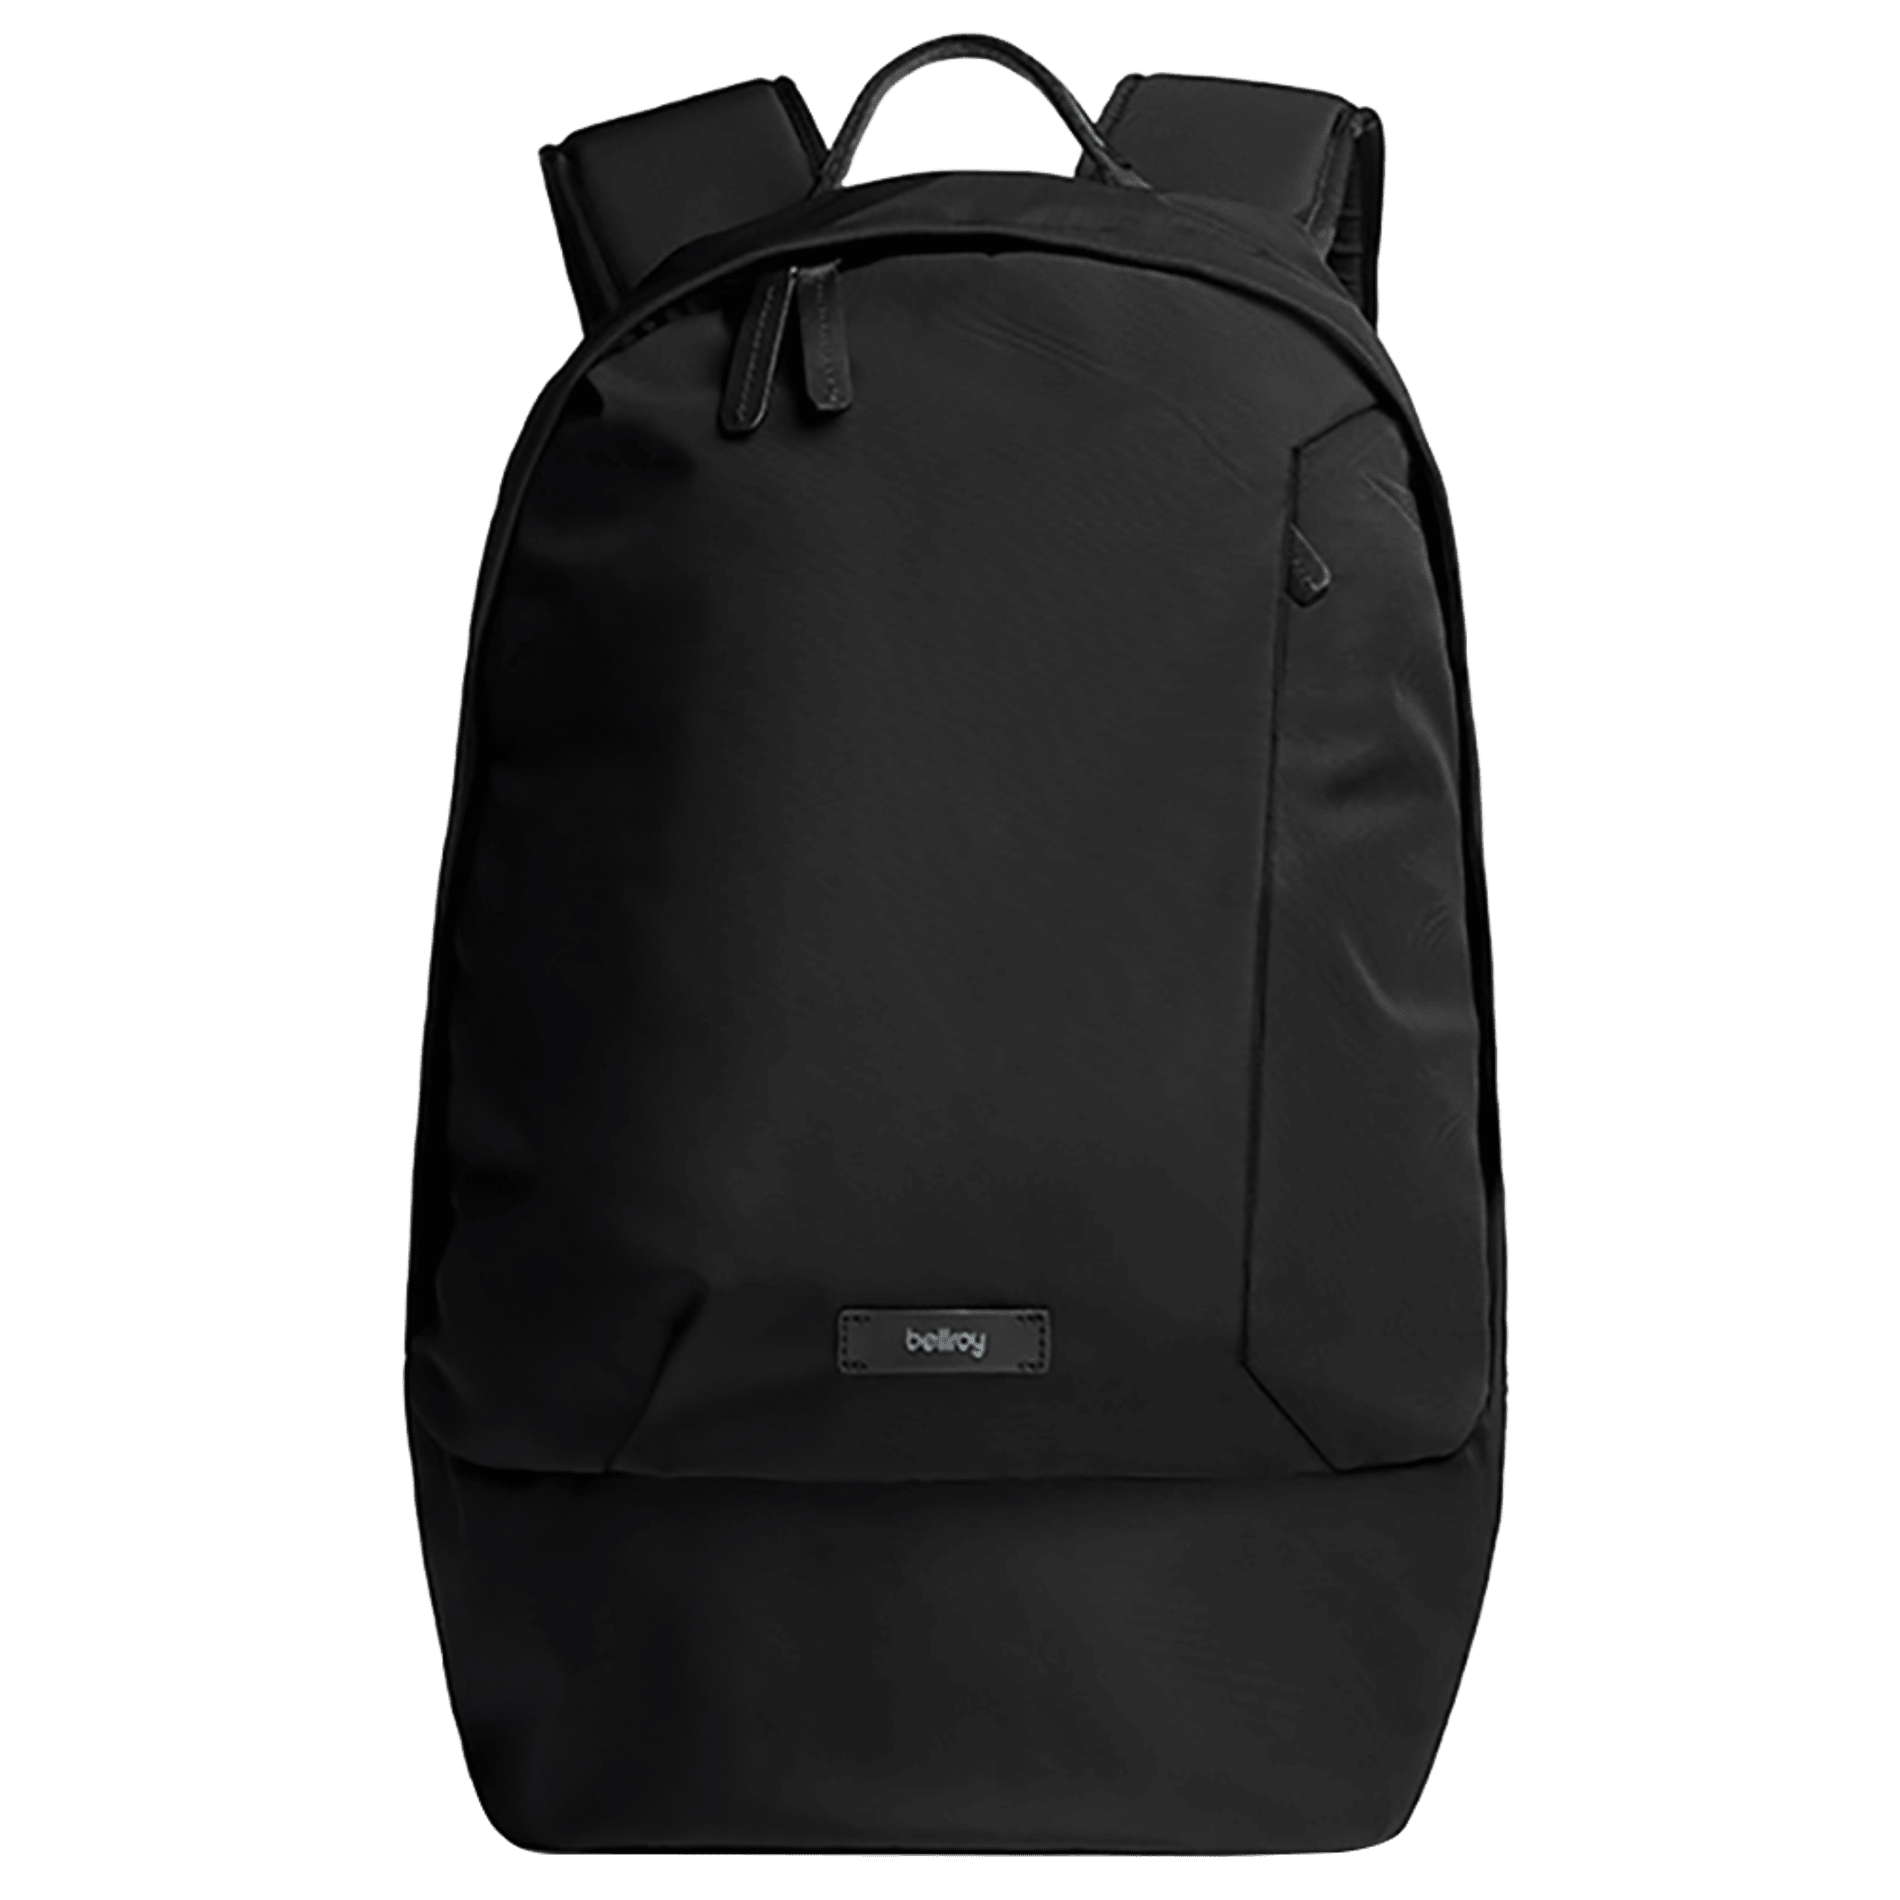 Bellroy 4400-01 - Classic 15" Computer Backpack